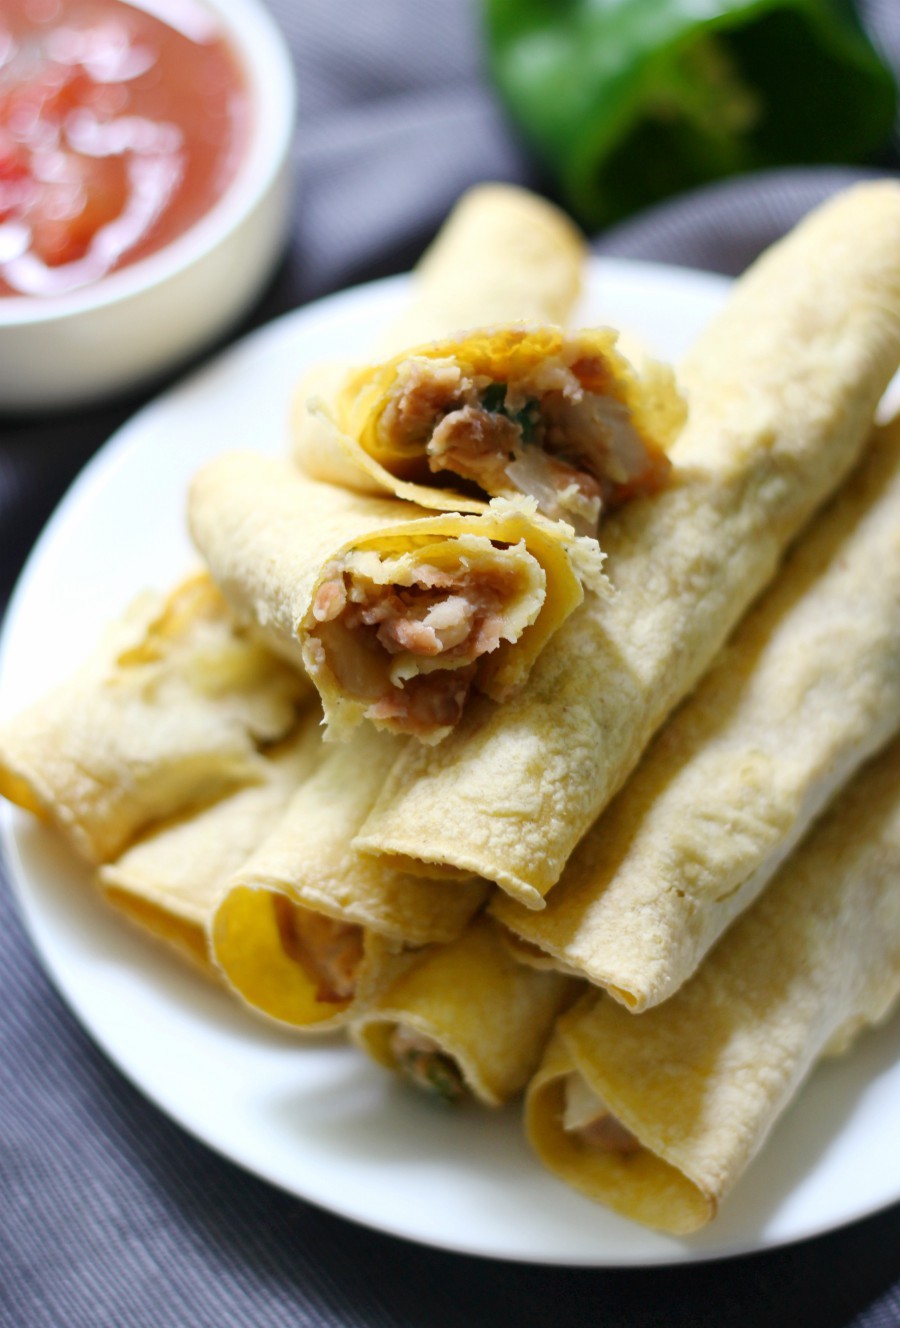 Gluten-Free Baked Pinto Bean Taquitos (Vegan, Allergy-Free) | Strength and Sunshine @RebeccaGF666 Change up your taco routine with the Mexican "rolled taco"! Gluten-Free Baked Pinto Bean Taquitos that are vegan, top 8 allergy-free, require no oil, and perfect as a dinner recipe or fun appetizer bite to feed a crowd! A spicy pinto bean filling, simply rolled in corn tortillas! #taquitos #glutenfree #vegan #mexicanfood #strengthandsunshine